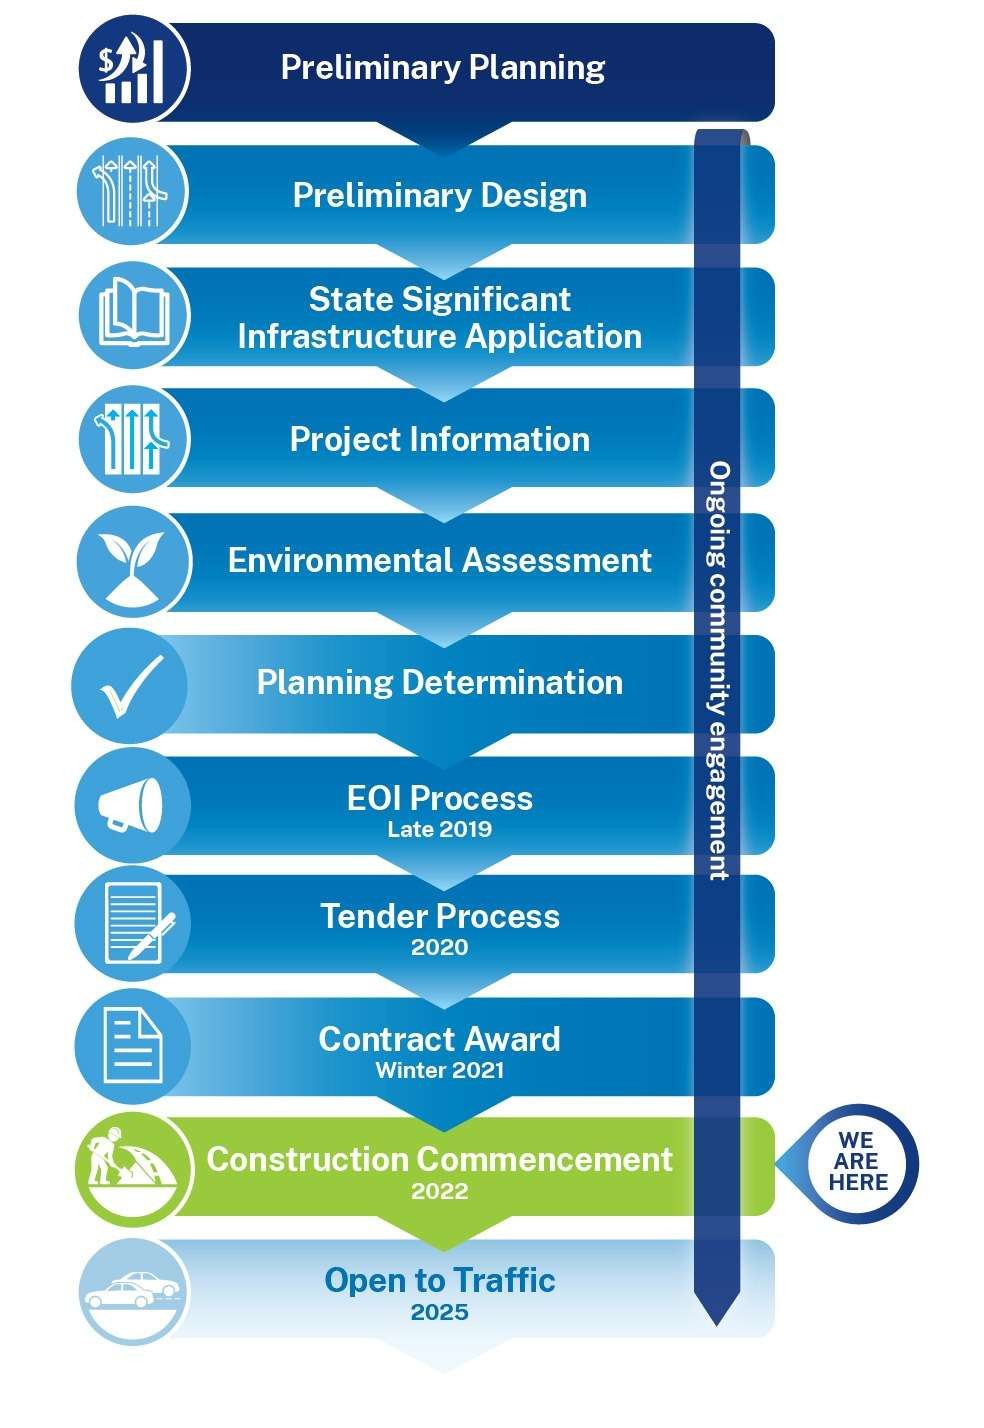 Timeline graphic depicting the current status of the M6 Stage 1 project. It indicates we are currently at contract award in Winter 2021 and are due to construction commencement in 2022, with an open date of 2025.